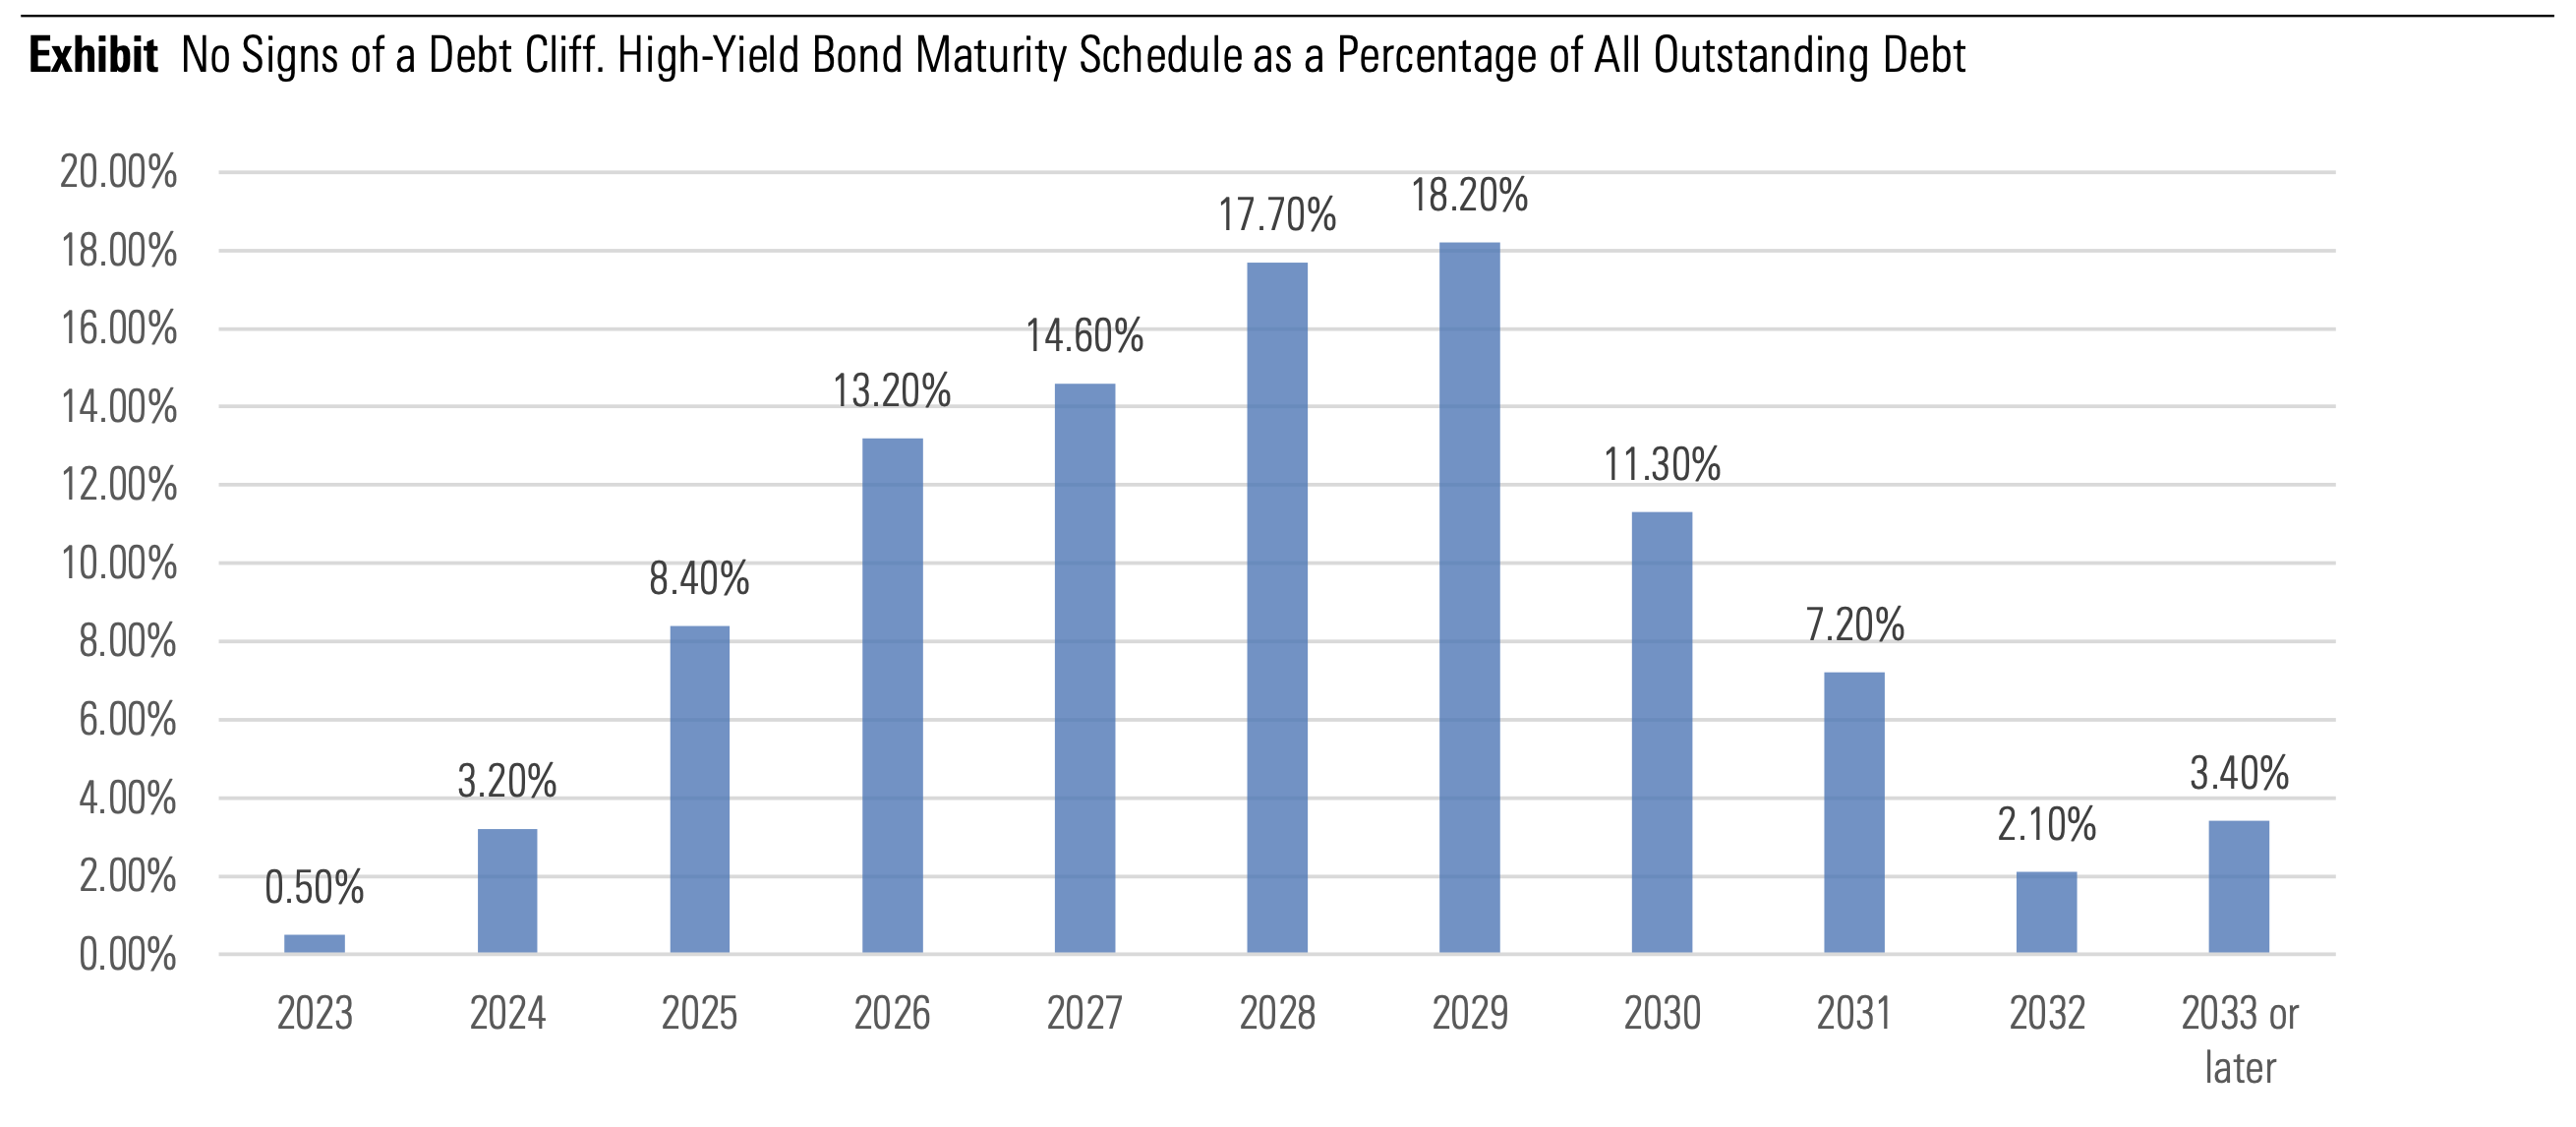 Chart showing high-yield bond maturity schedule as a percentage of all outstanding debt.